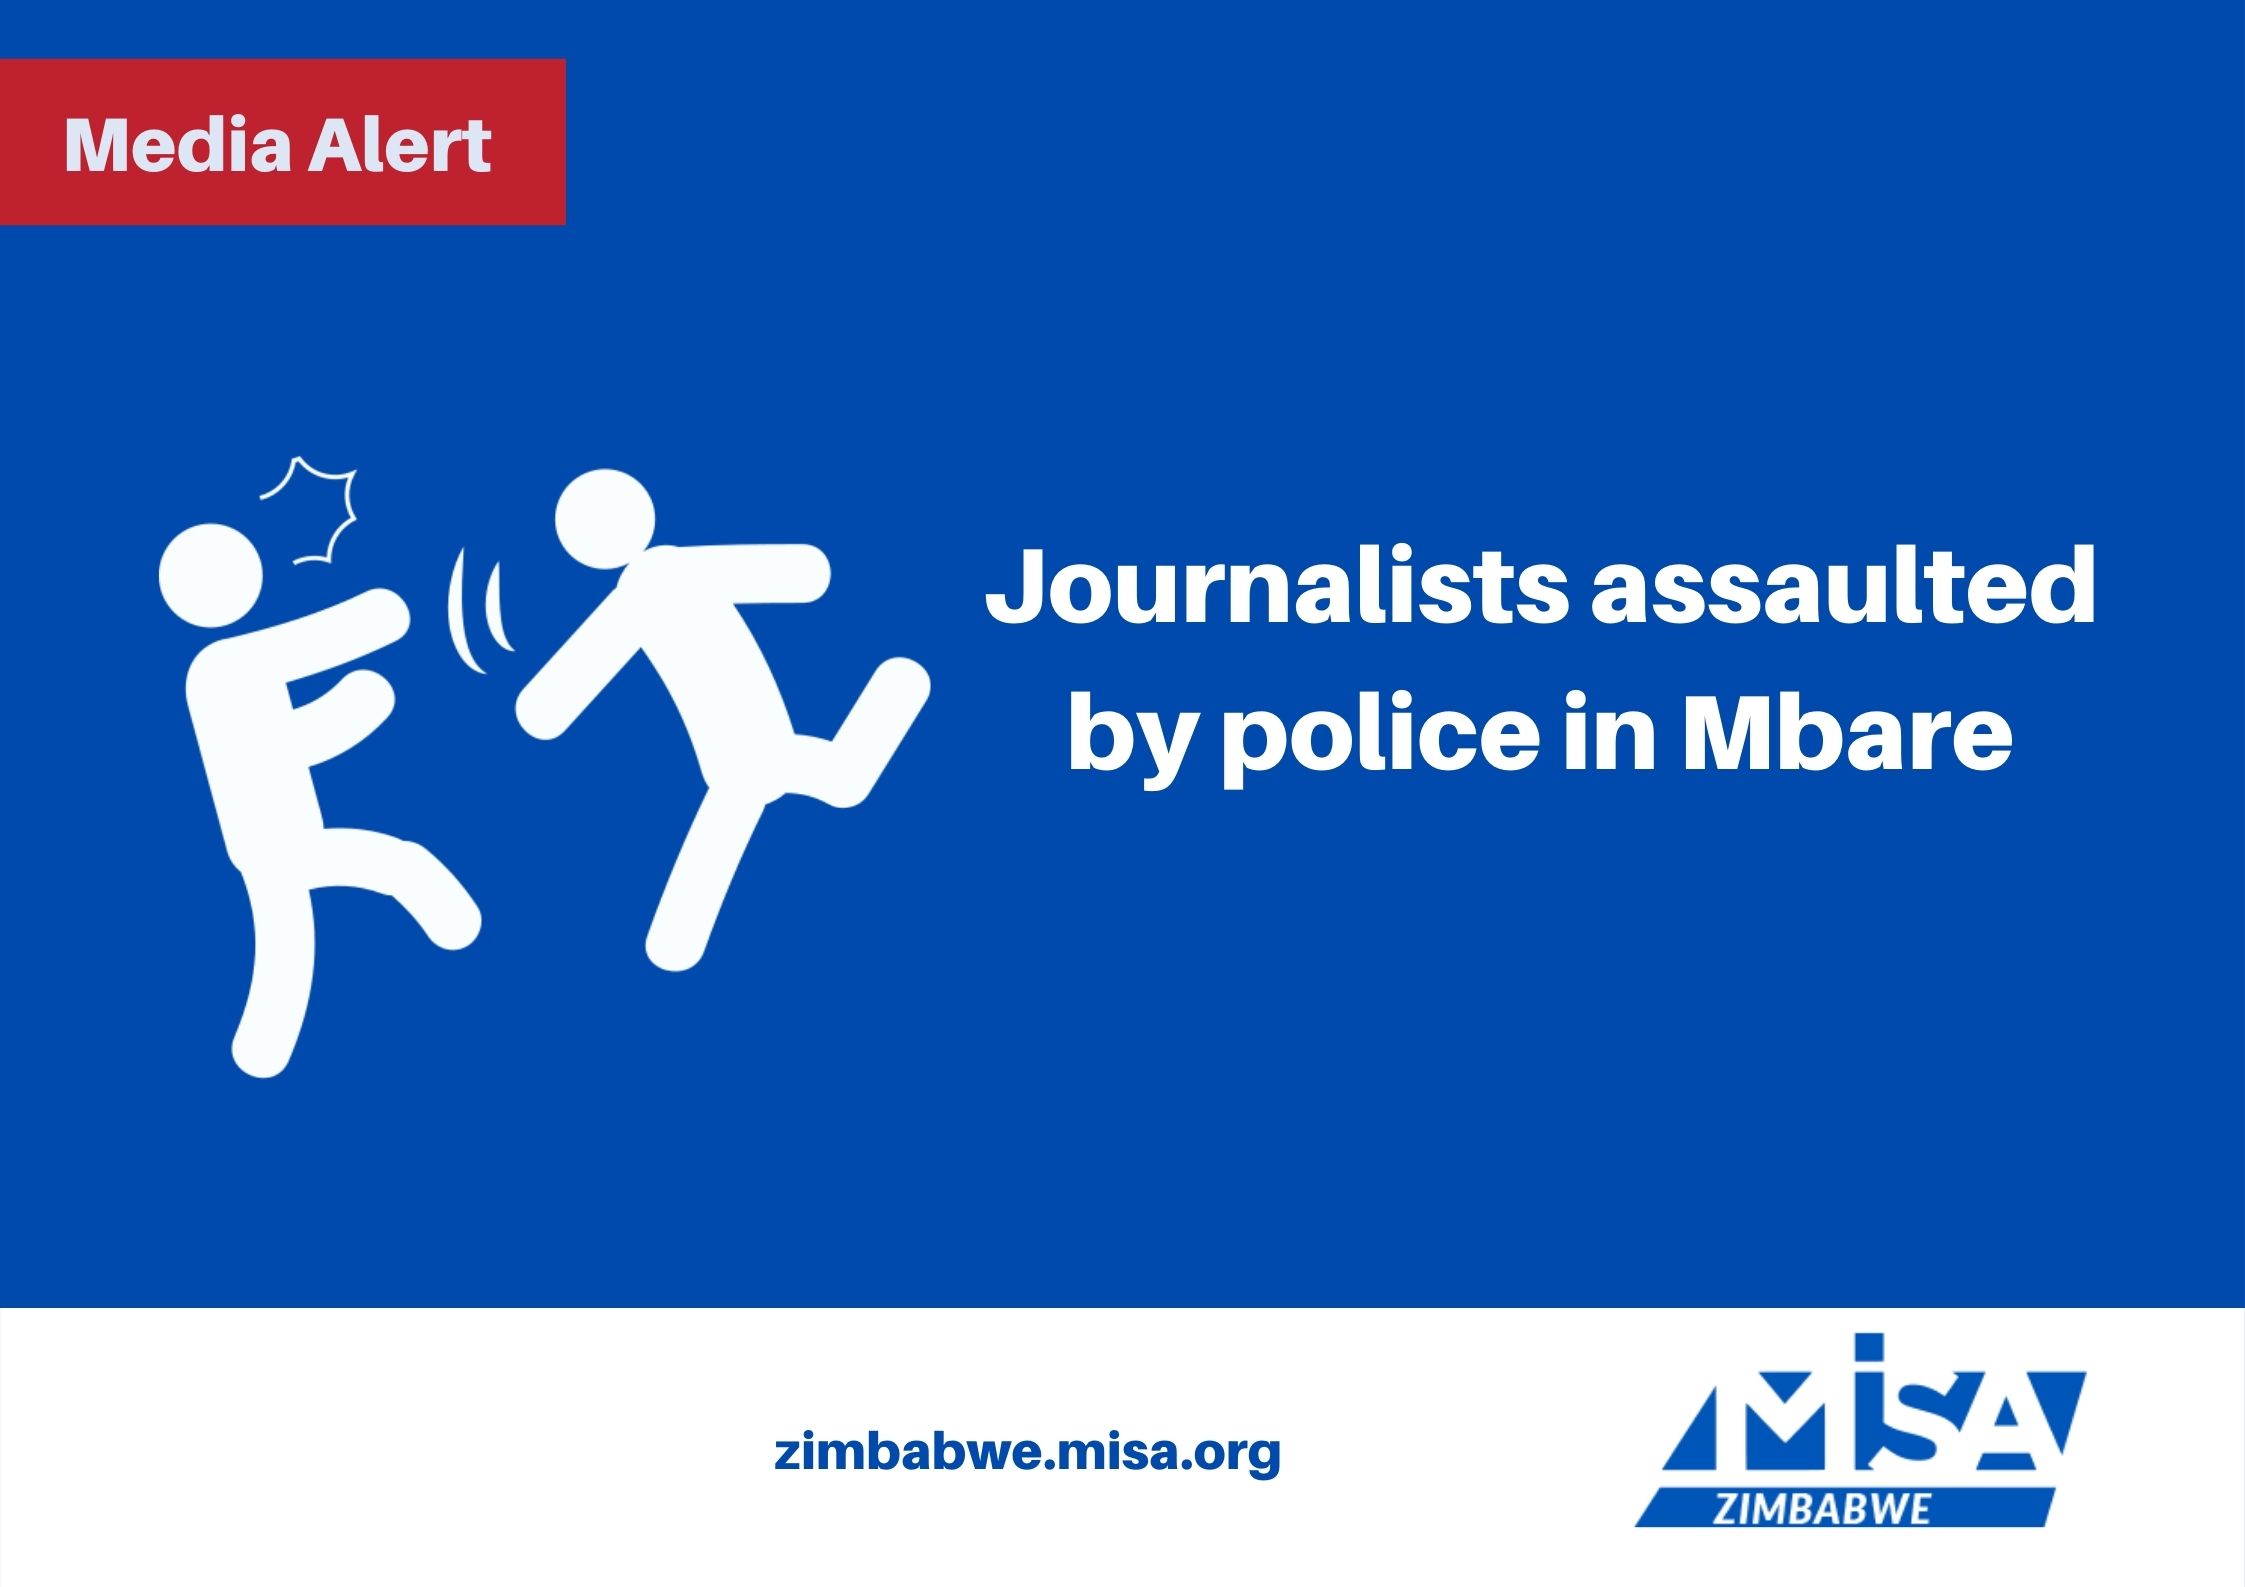 Journalists assaulted by police in Mbare